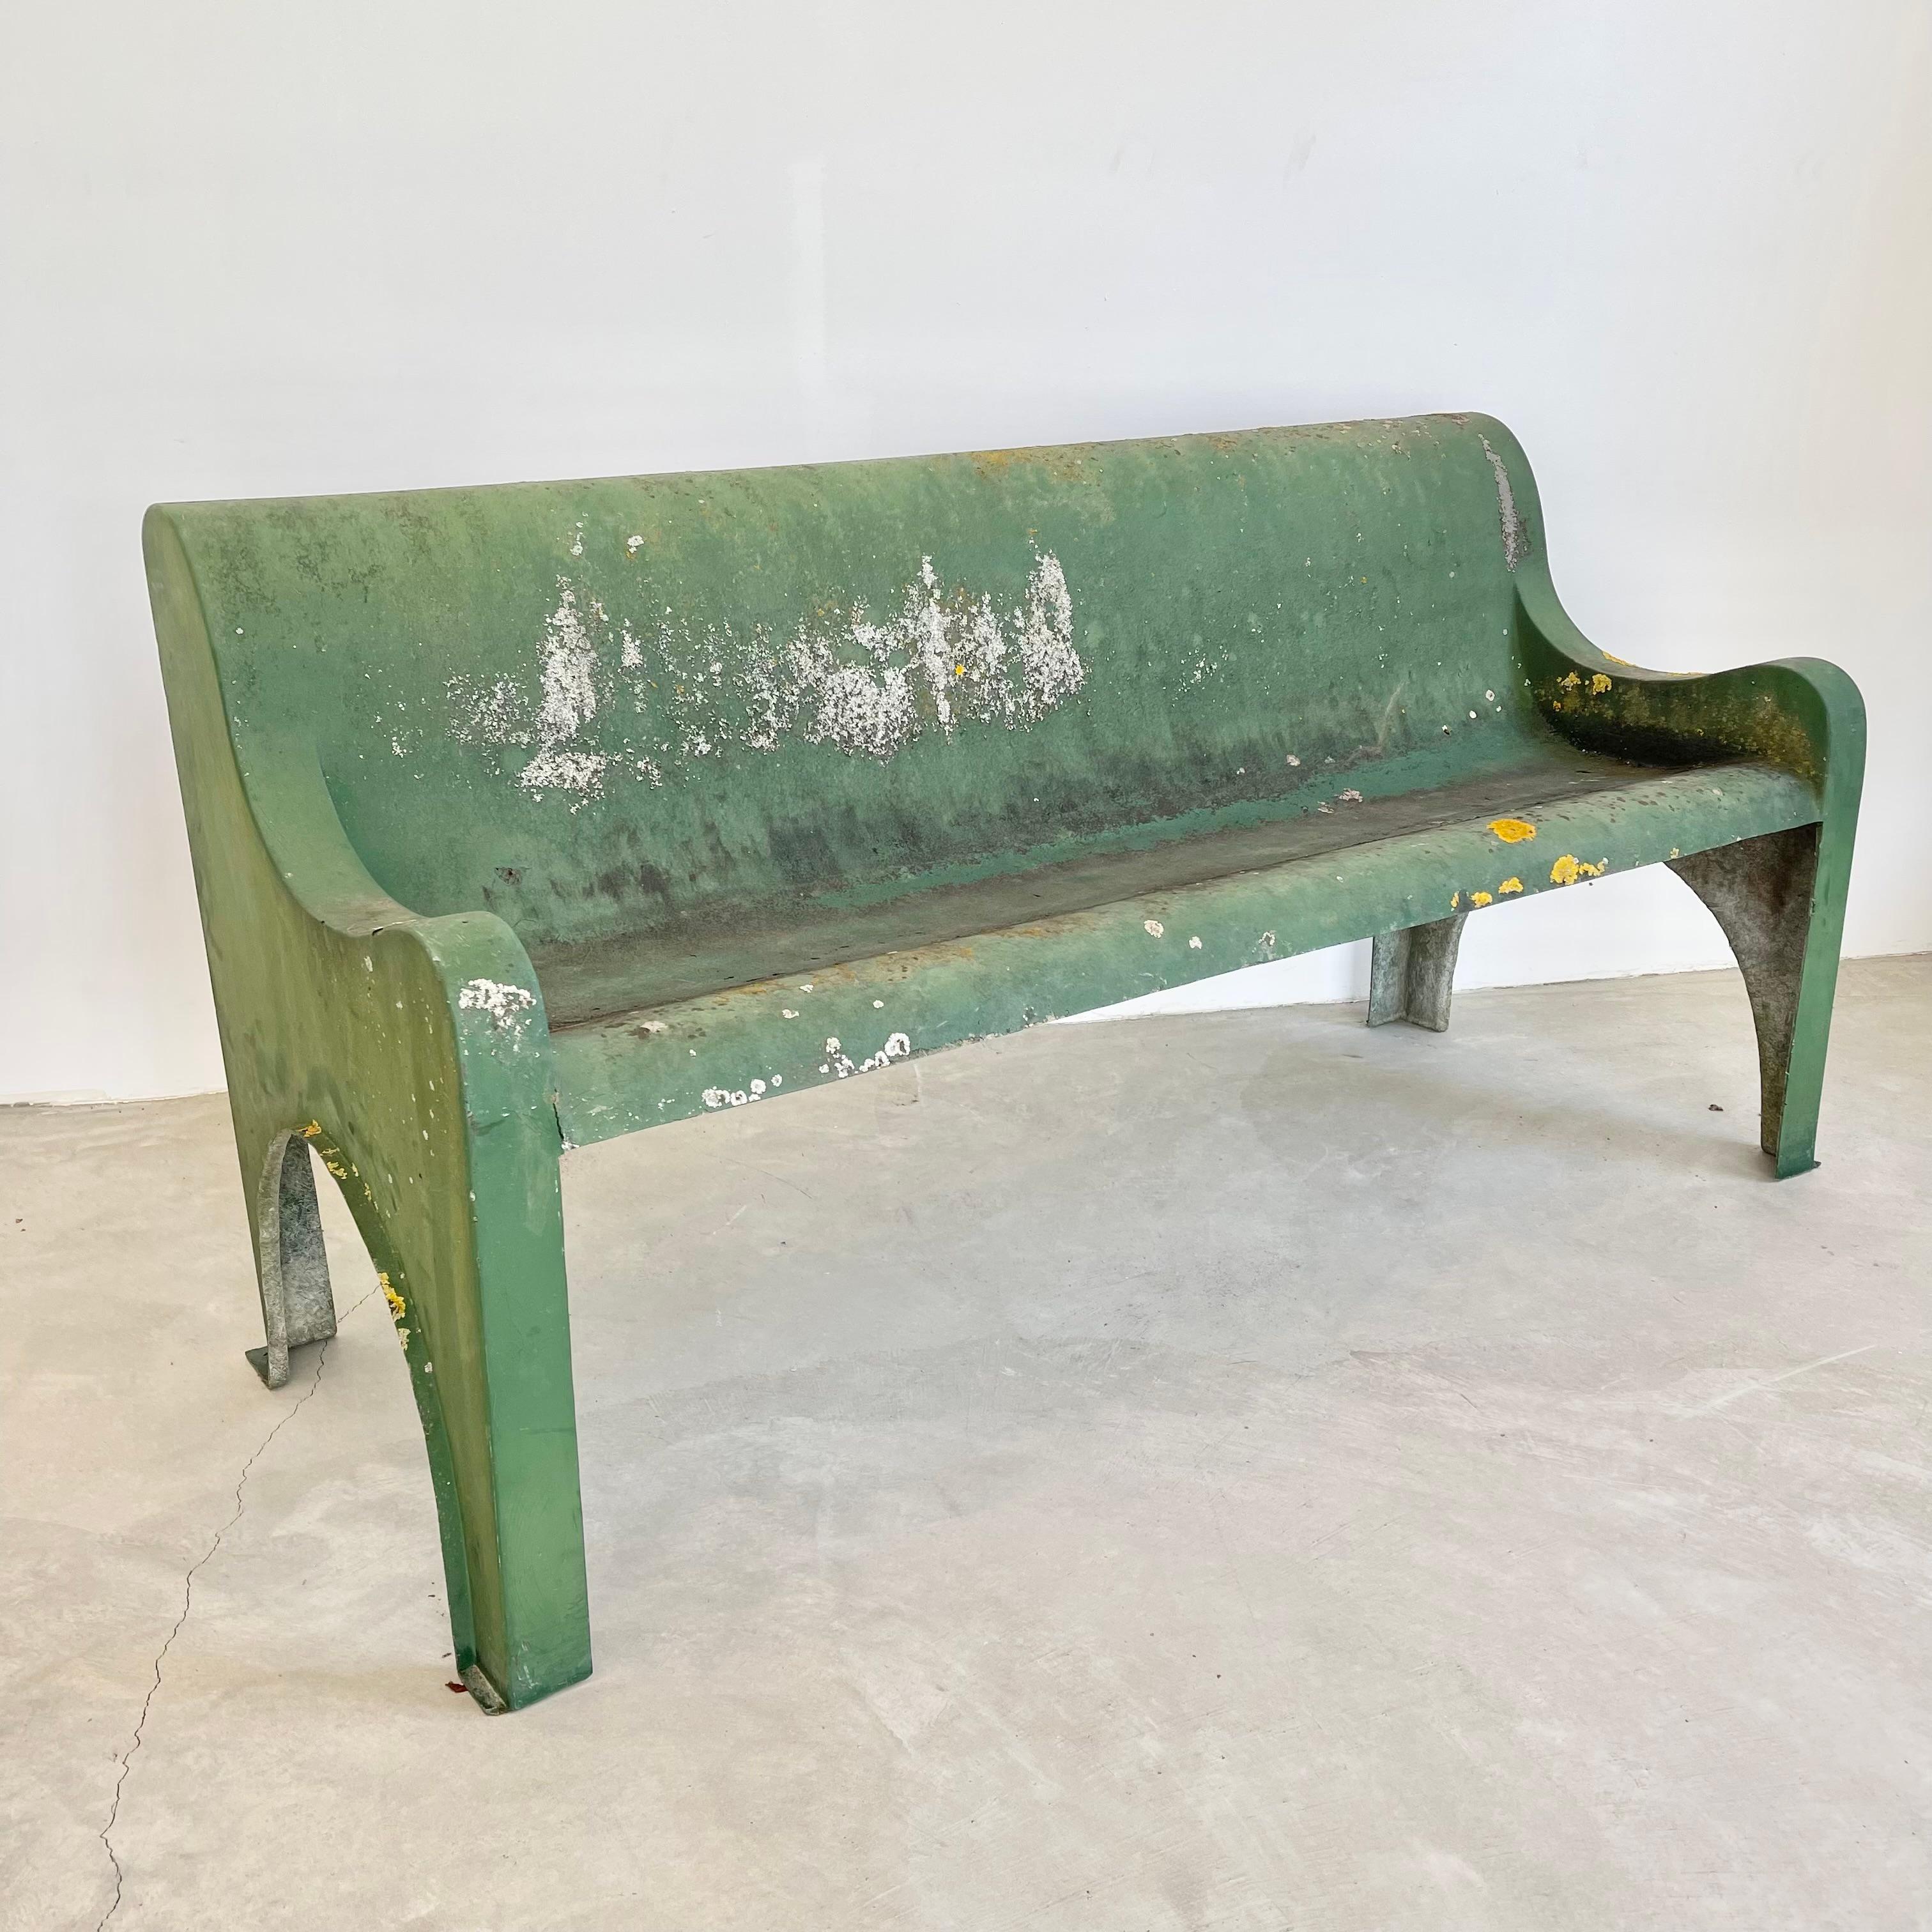 Stunning sculptural green fiberglass bench made in Belgium, circa in the 1970s. Beautiful and simplistic design. Single piece of fiberglass sculpted with great lines from all angles. Made for the outdoors but also looks great inside. Incredible